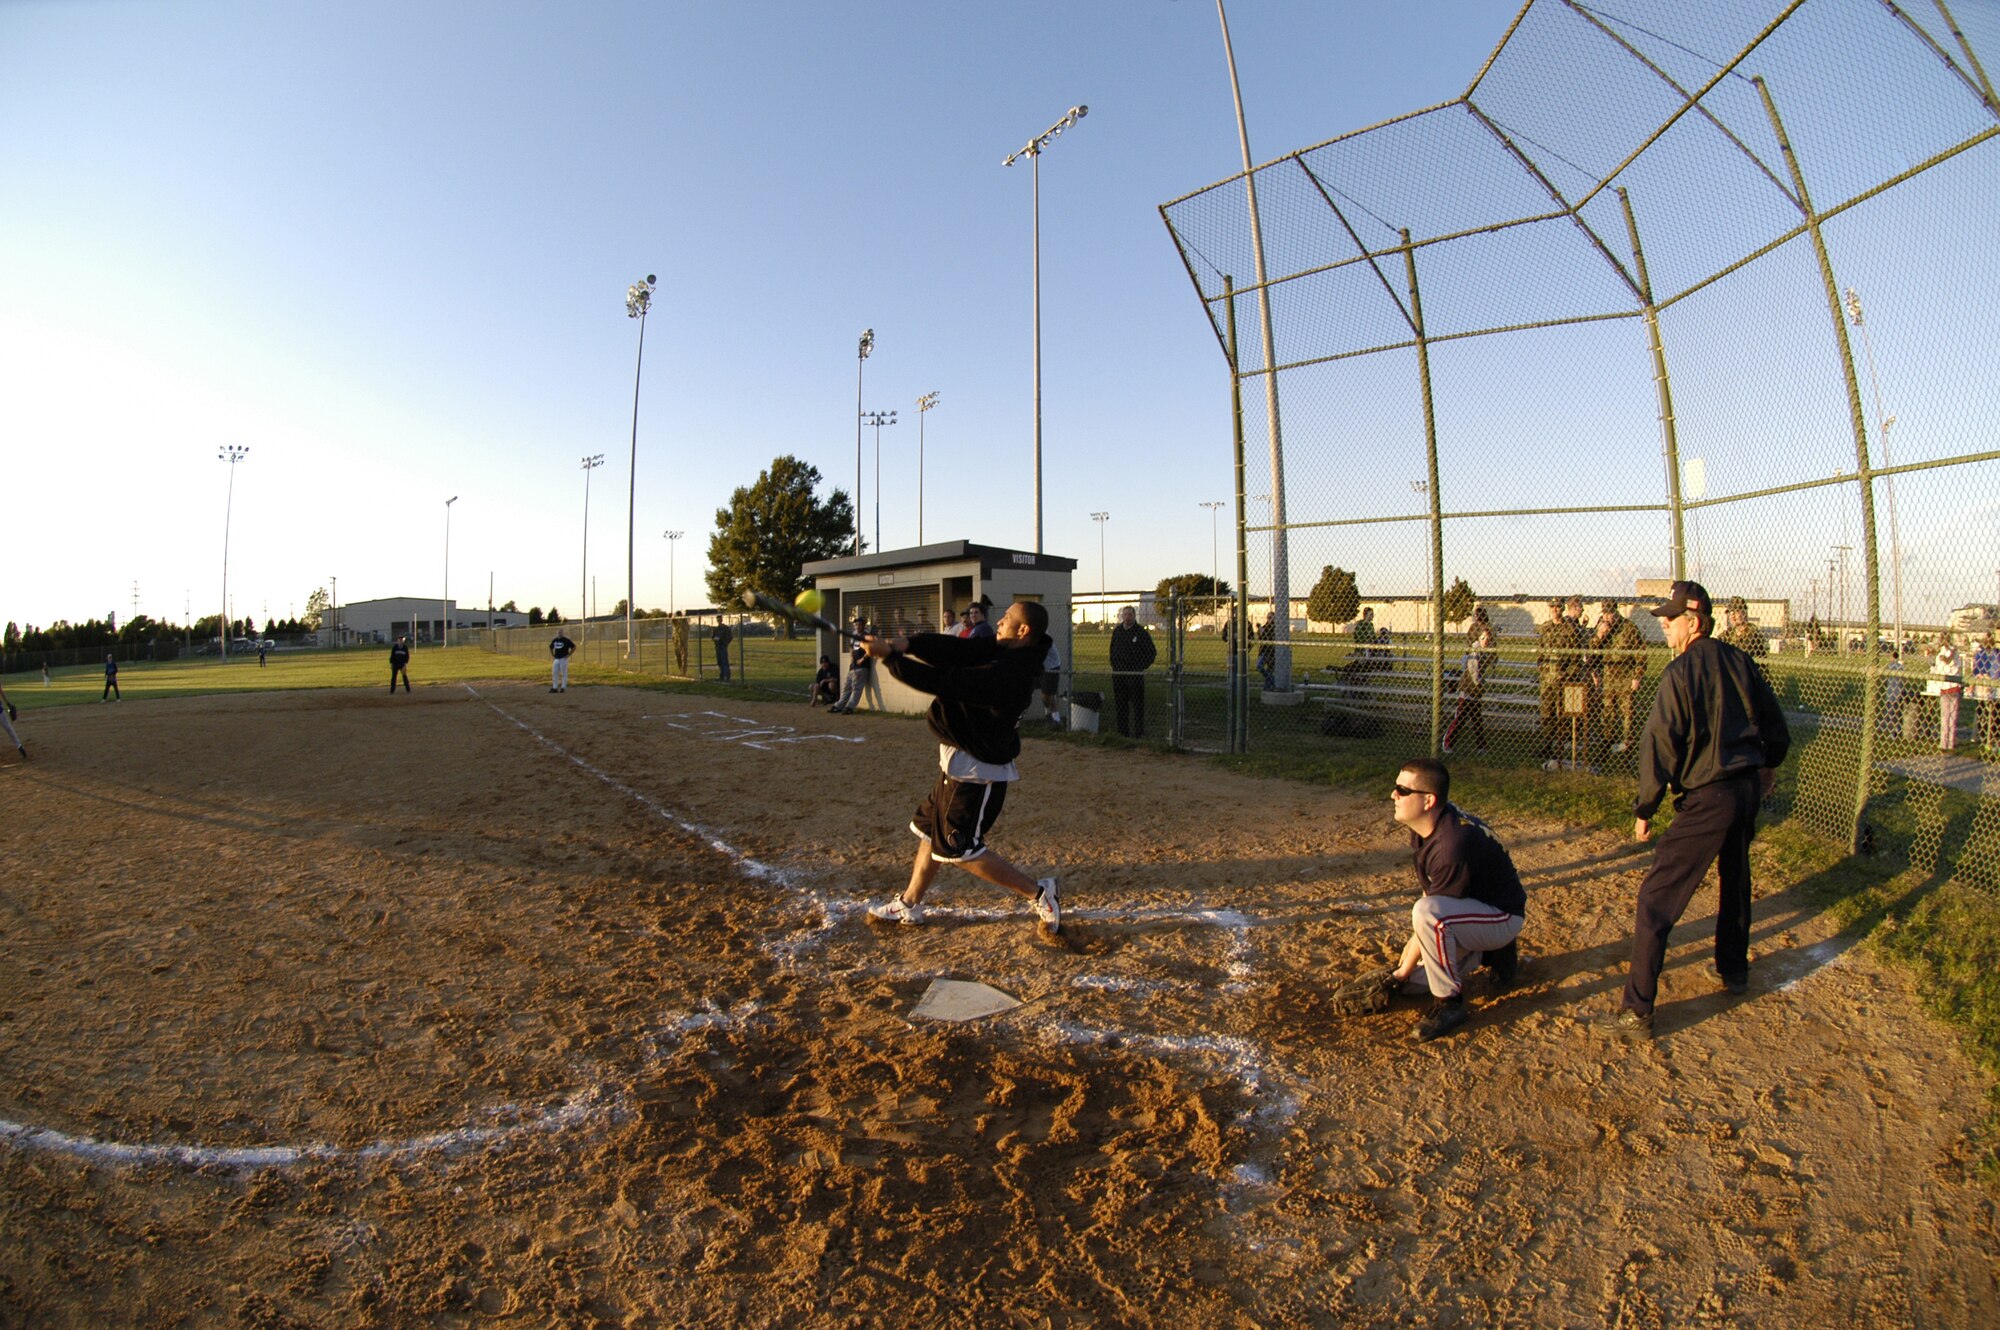 Damien Jones, 436th Civil Engineer Squadron Fire Department, cranks a ball toward right field in the last inning. The Fire Dogs defeated the Cops 15 - 9. (U.S. Air Force photo by Senior Airman James Bolinger)